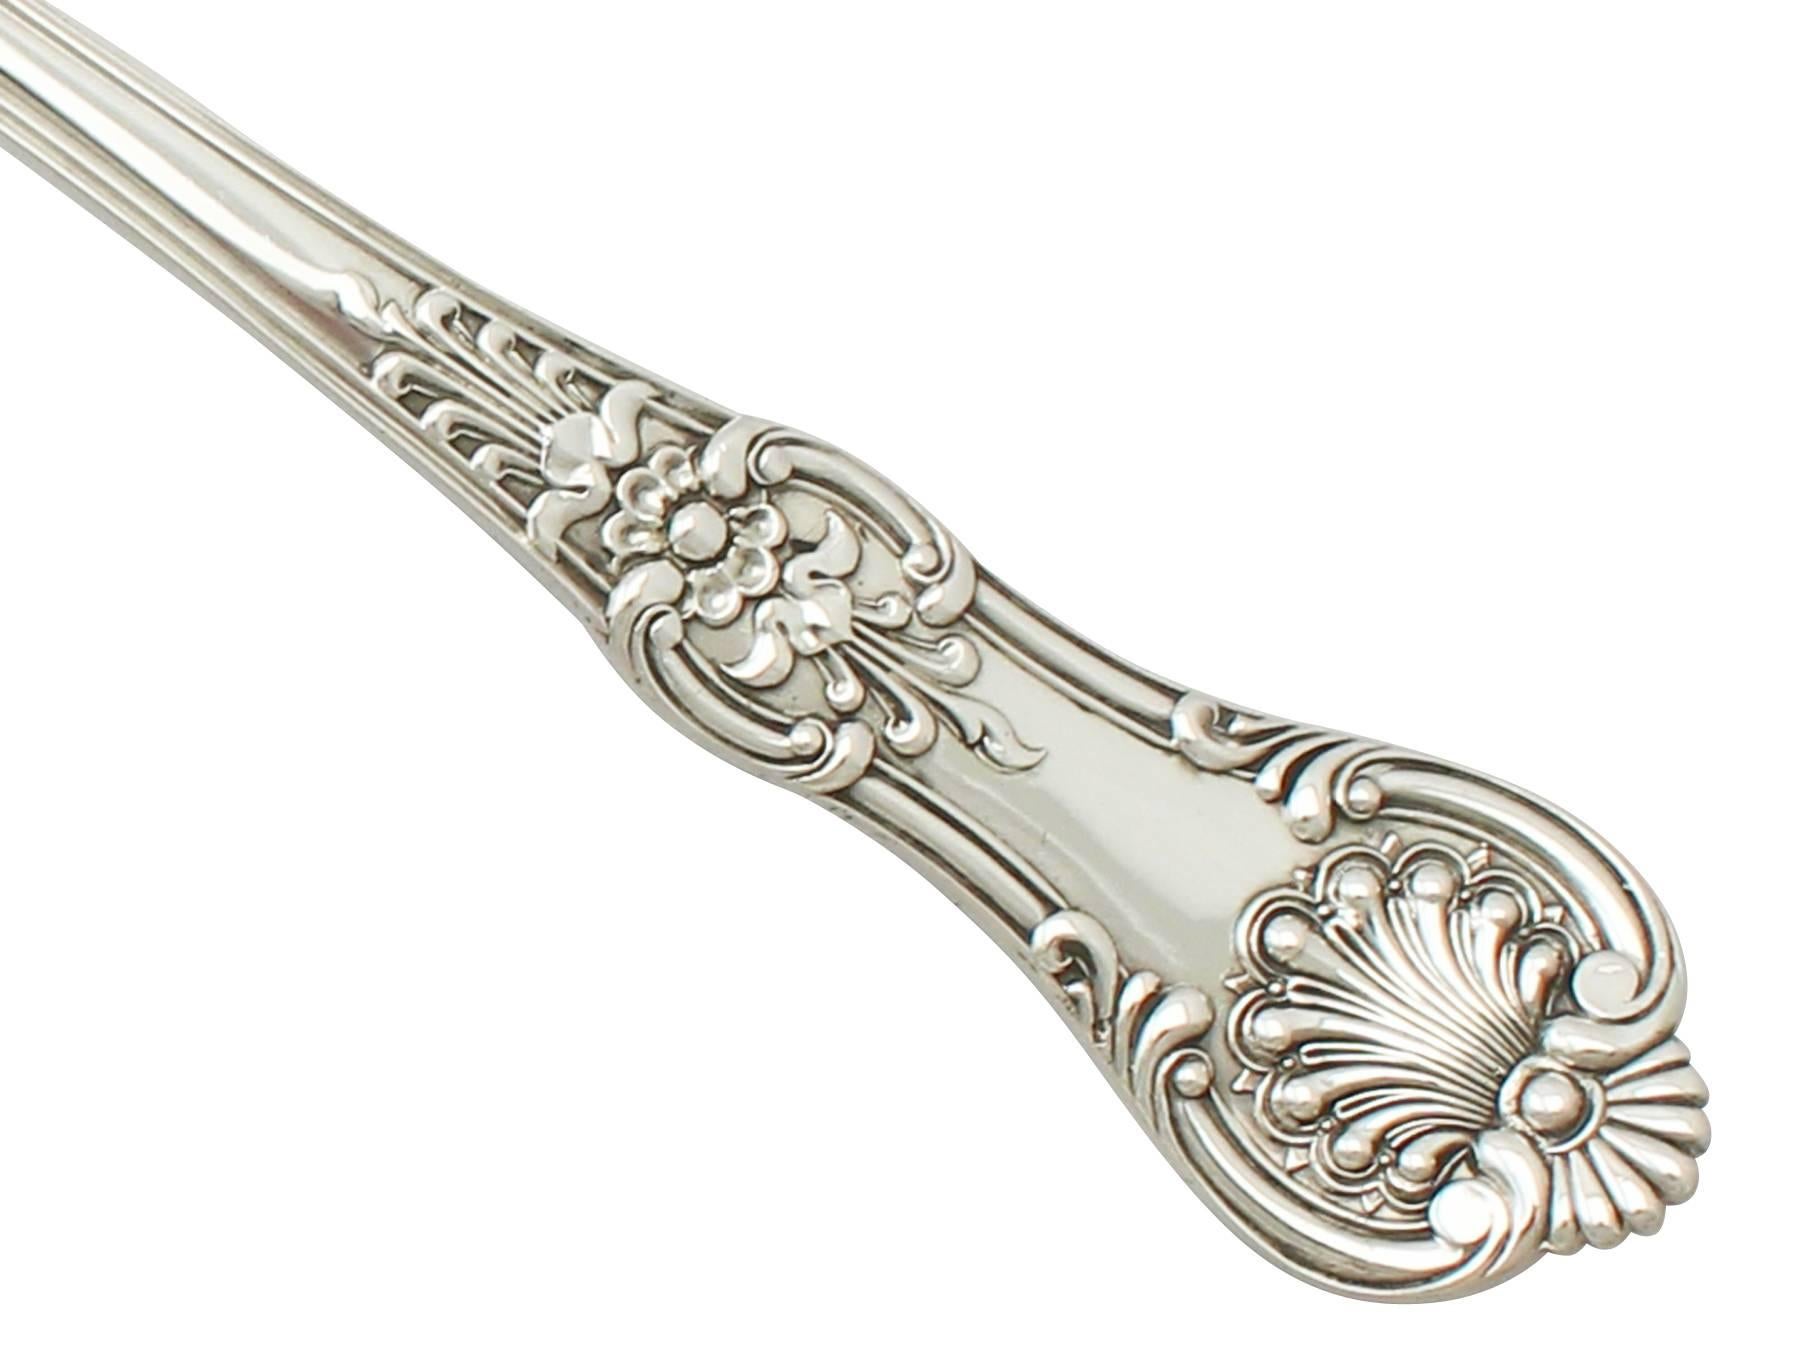 English Sterling Silver Queen's Pattern Gravy Spoon by George Adams, Antique Victorian